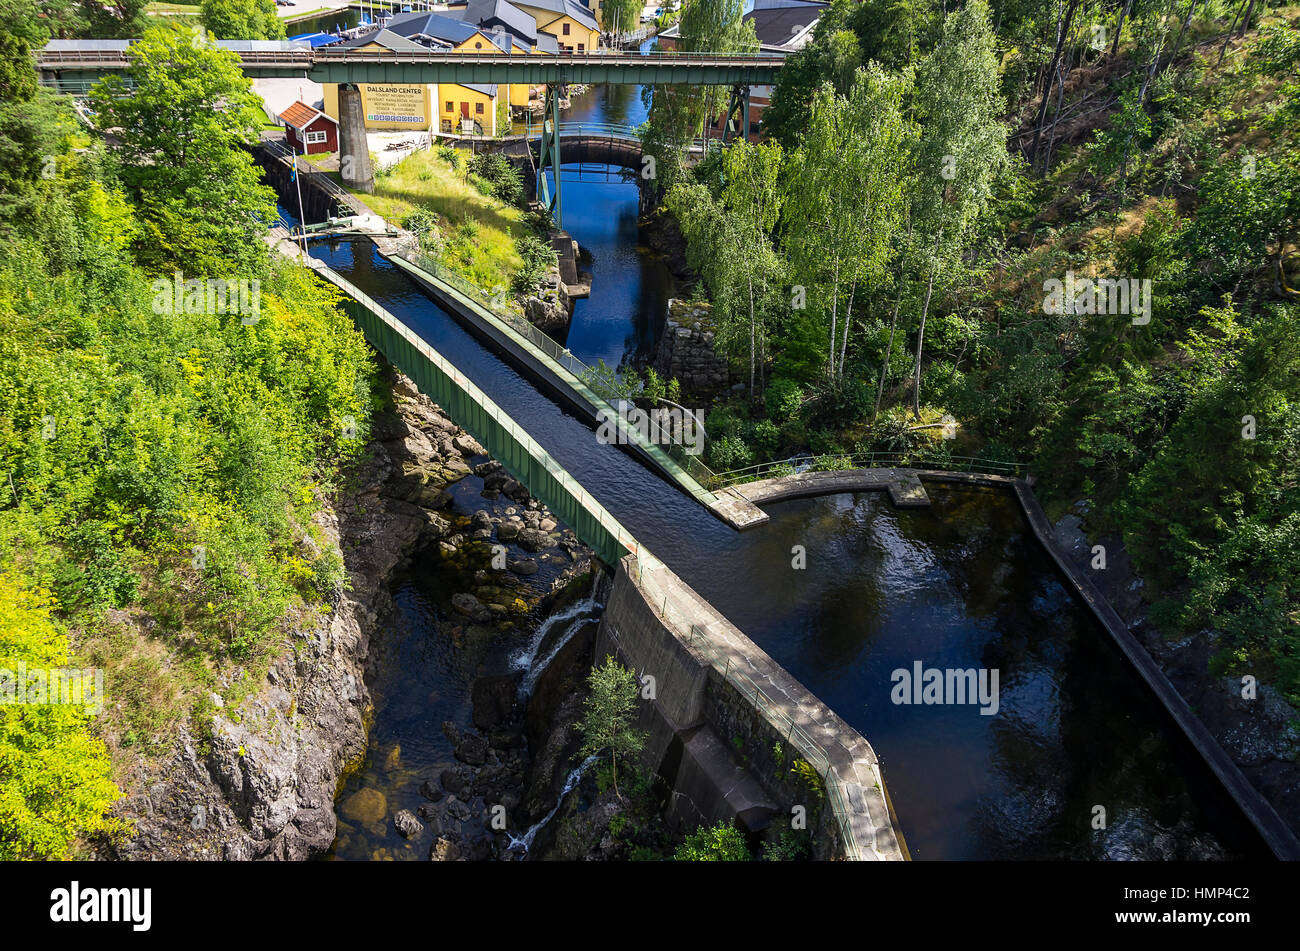 The Dalsland Canal and aqueduct in Haverud, Dalsland, Sweden. Dalslandkanal und Aquädukt in Haverud, Dalsland, Schweden. Stock Photo